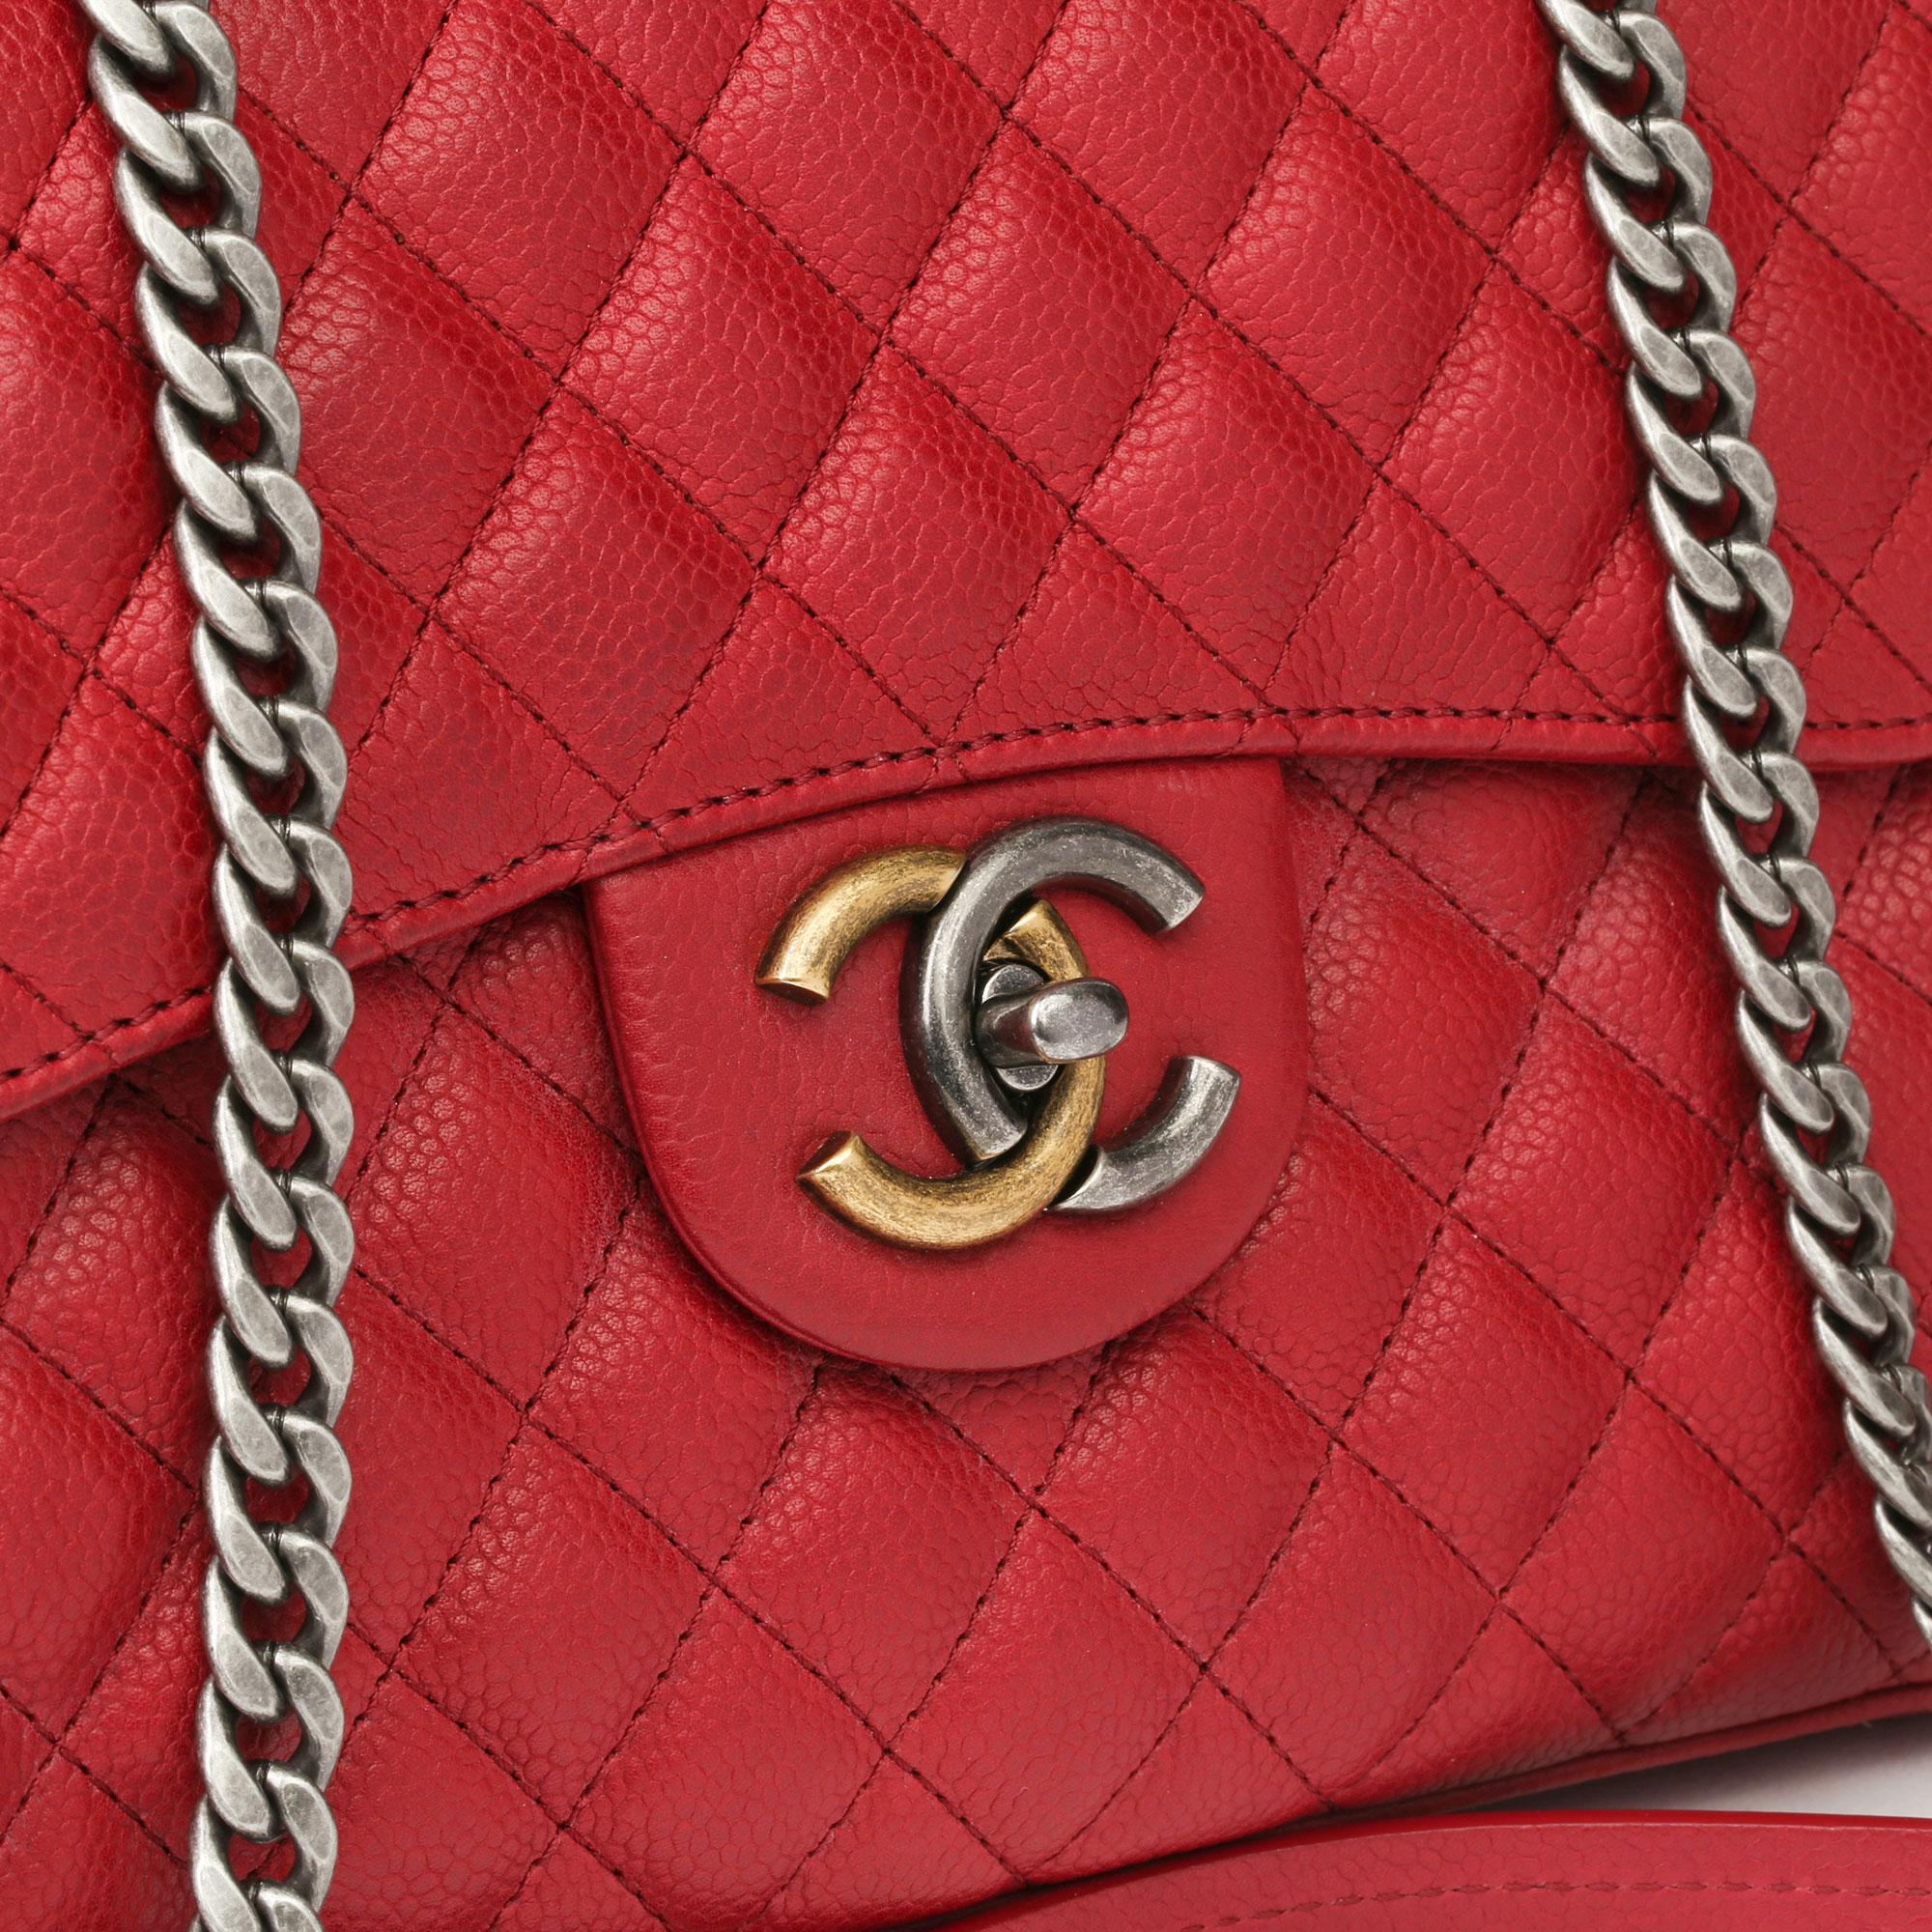 2017 Chanel Burgundy Quilted Caviar Leather Timeless Shoulder Tote  For Sale 3